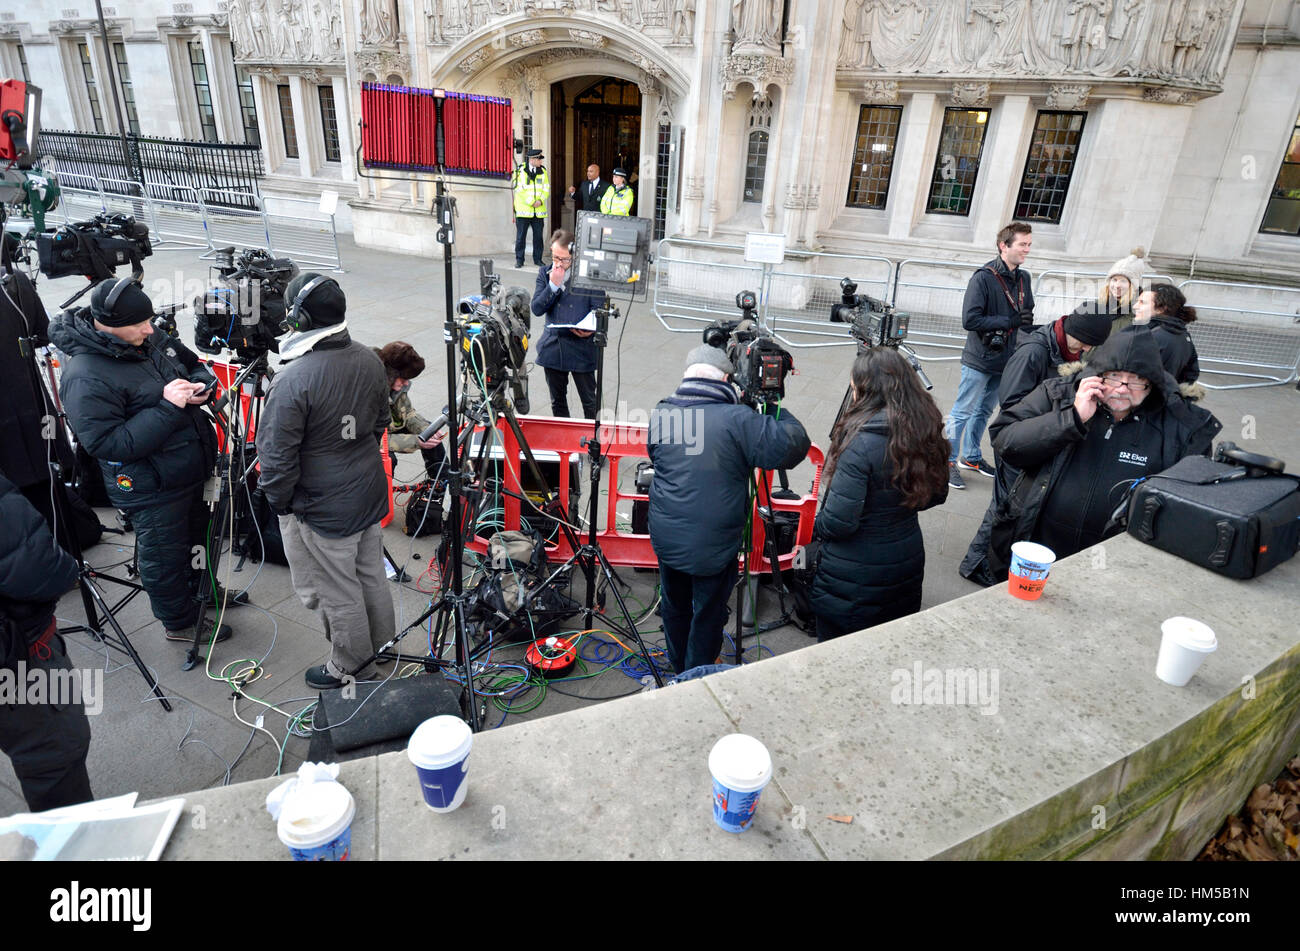 London, UK. 5th December 2016. The Supreme Court hearing into the Government's appeal against the earlier High Court ruling begins. The media wait out Stock Photo